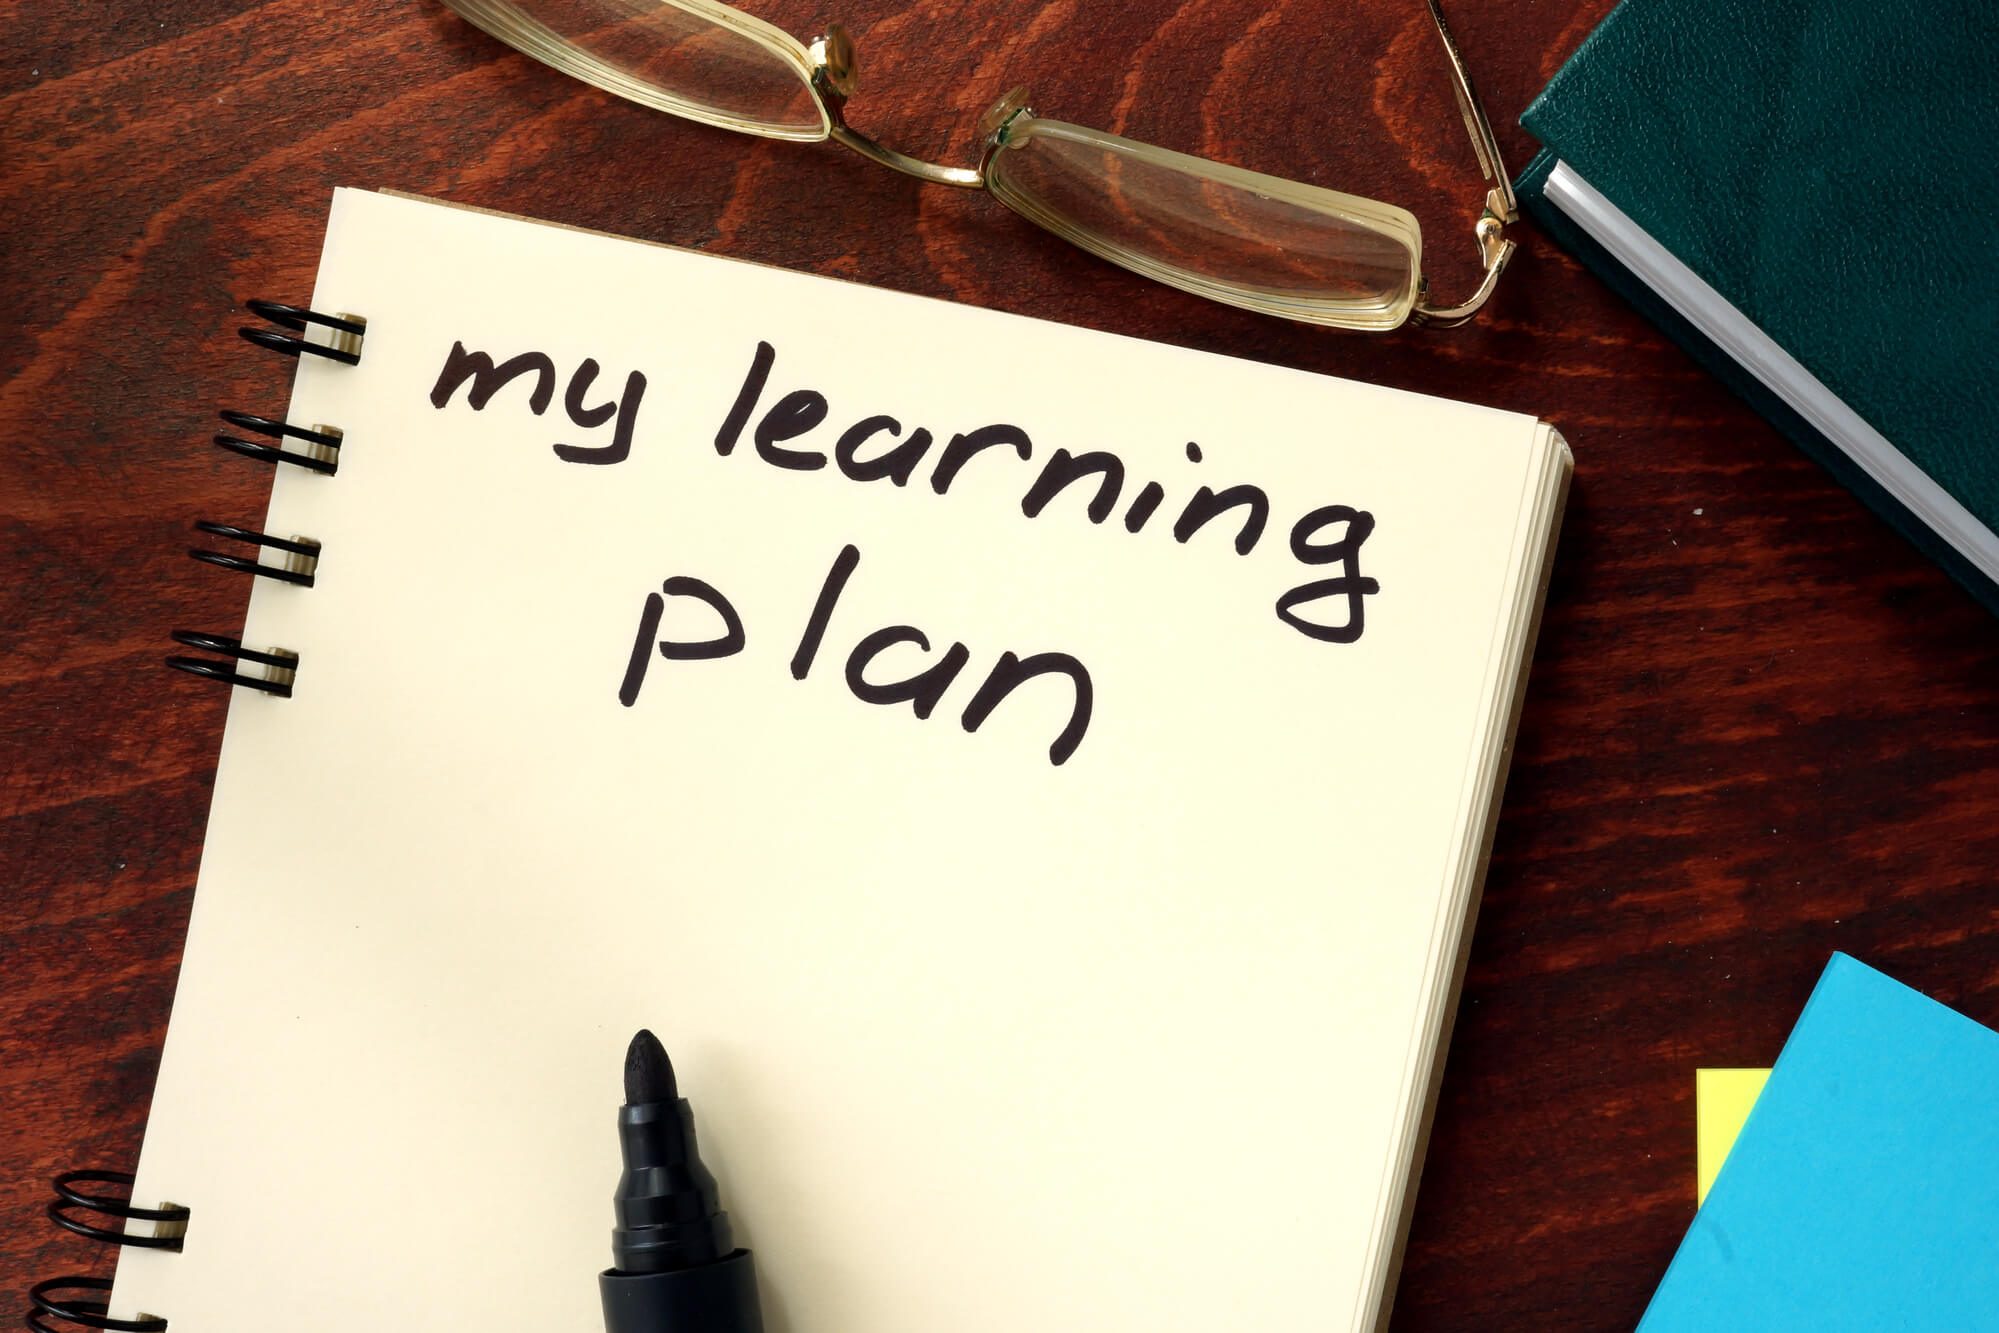 Learning plans for student needs